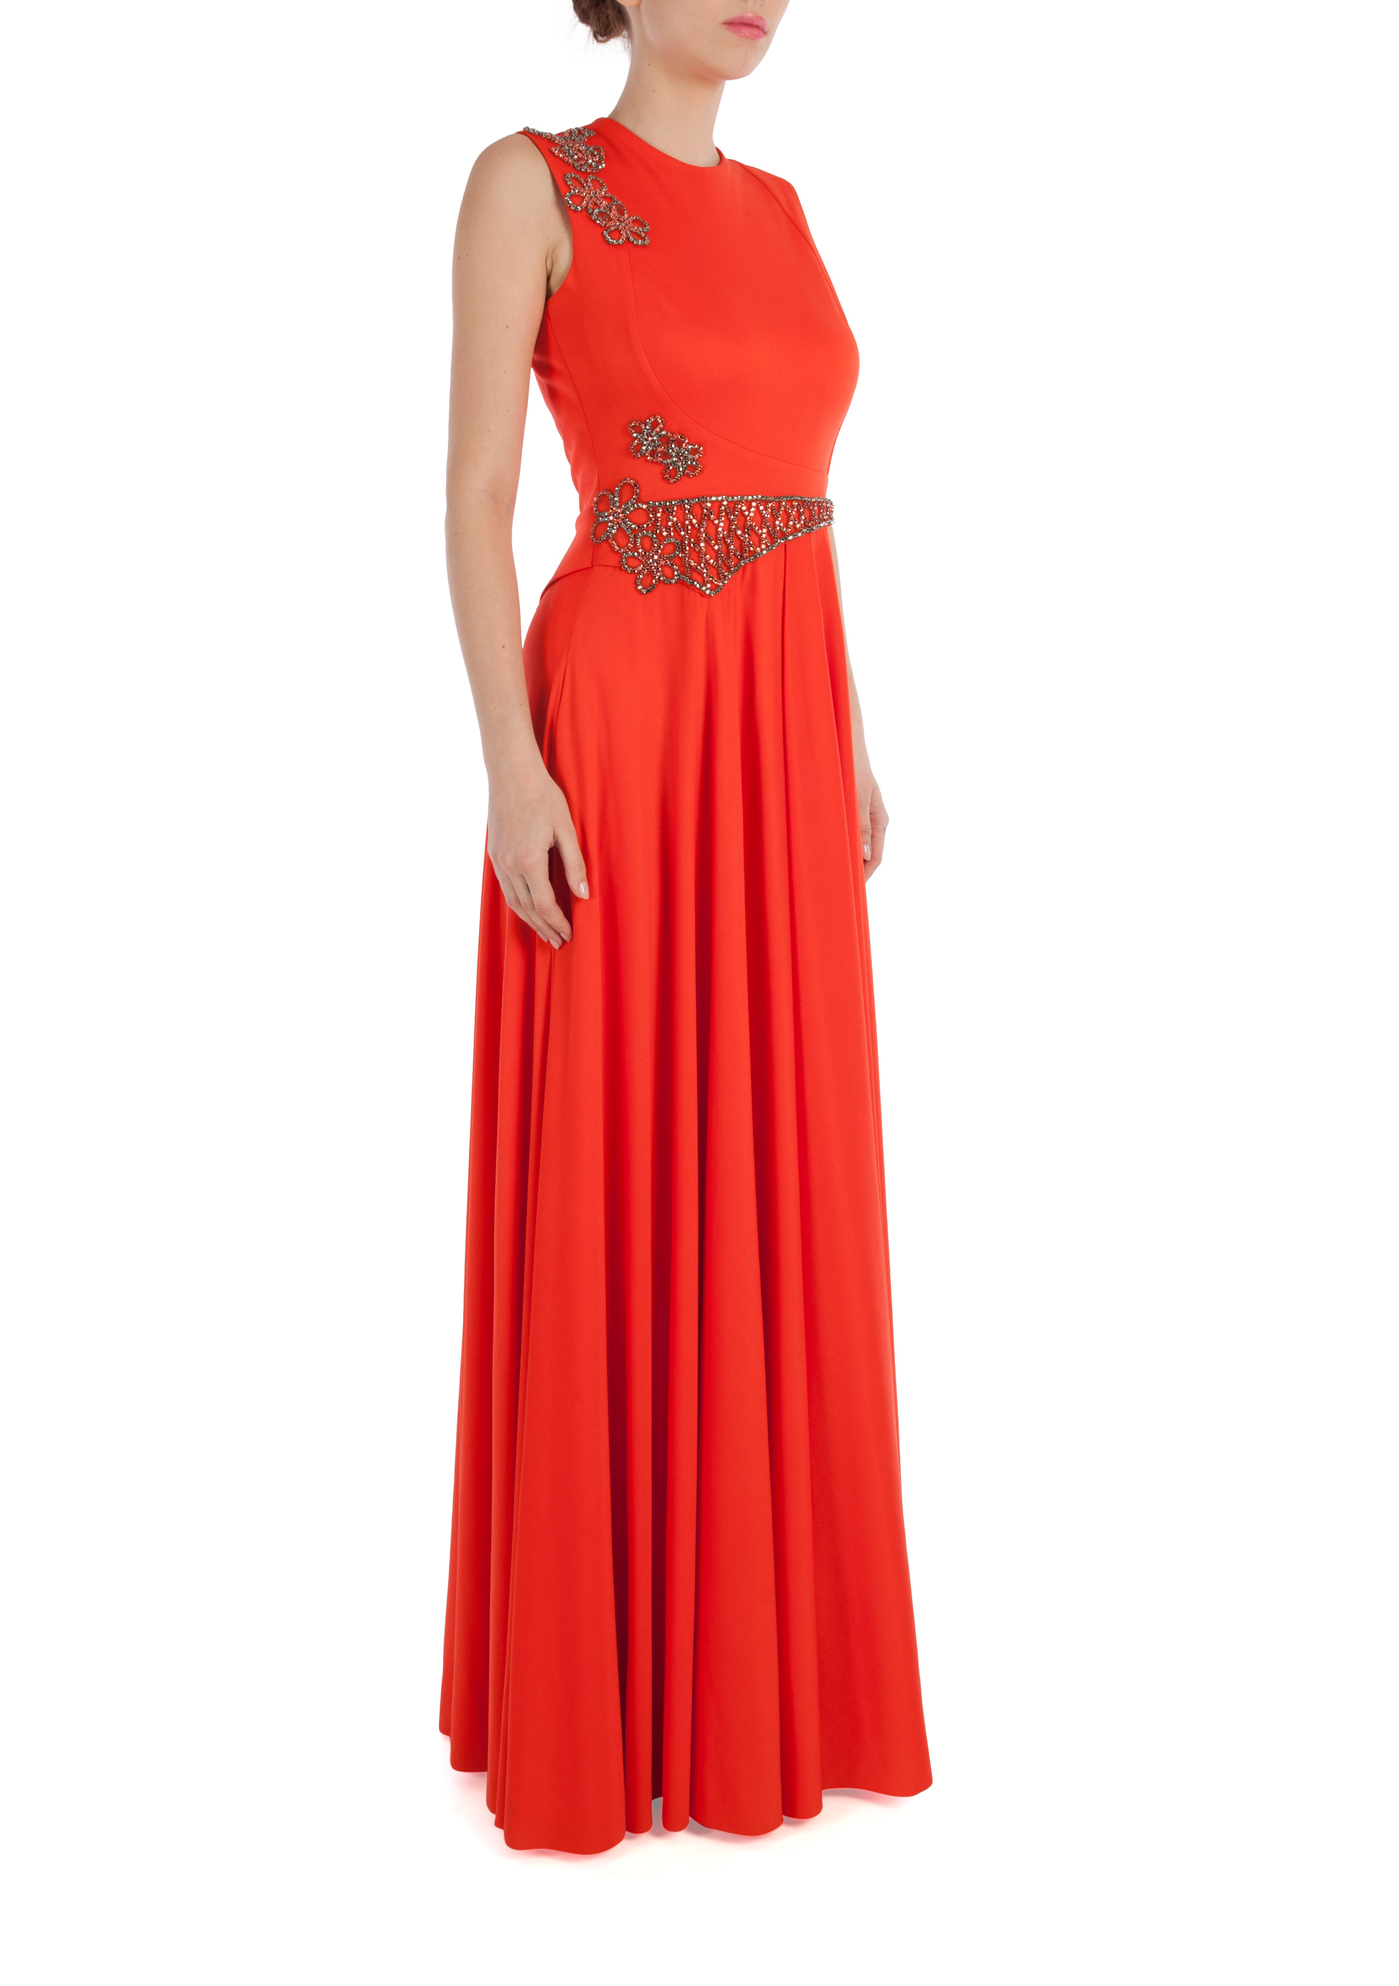 Orange love crystal gown by Dolly J | The Secret Label